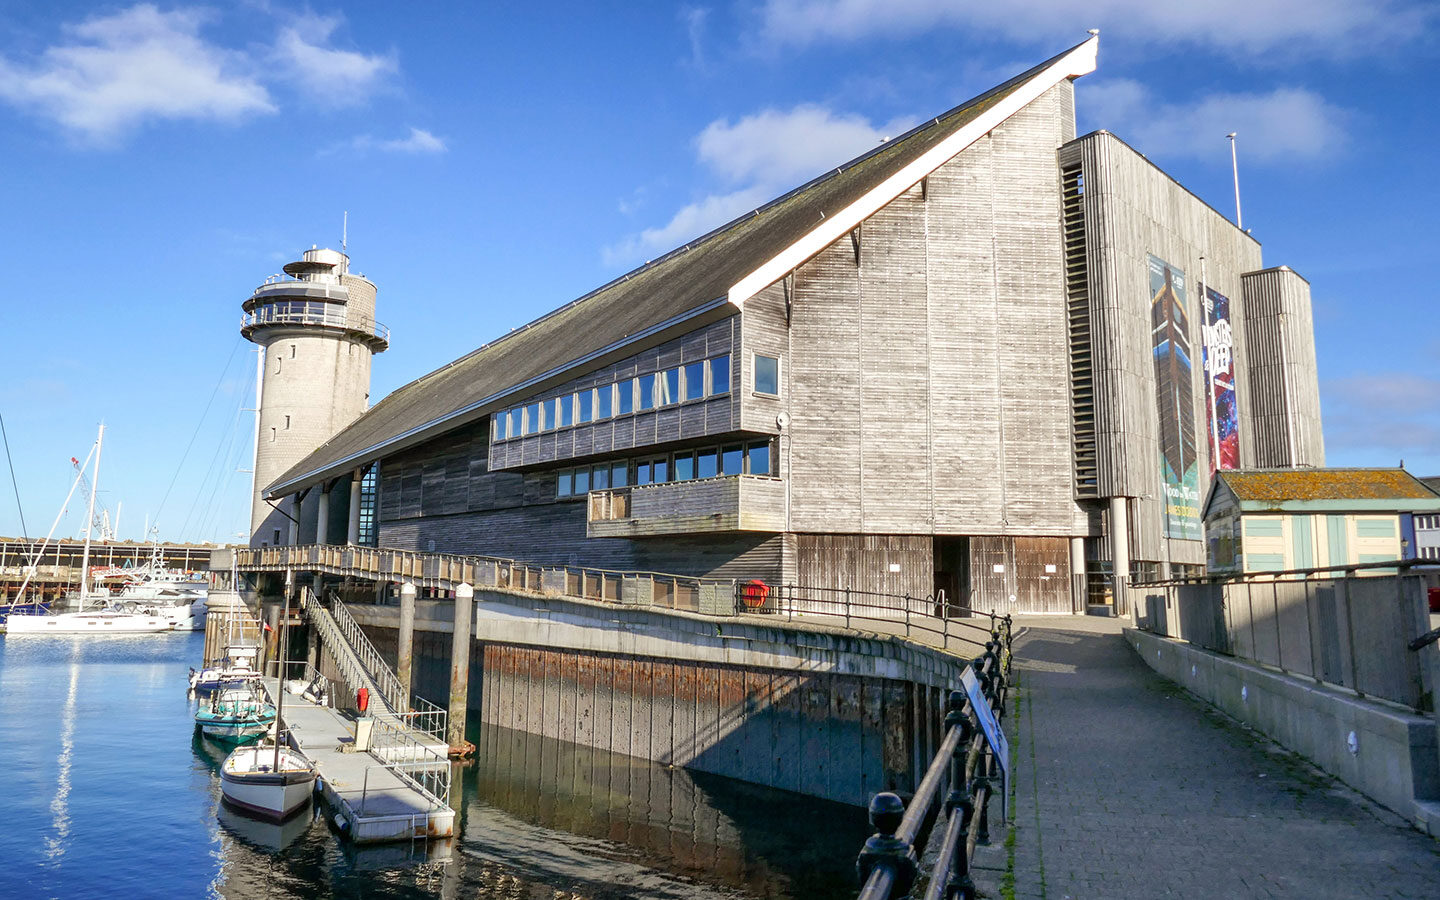 The exterior of the National Maritime Museum in Falmouth